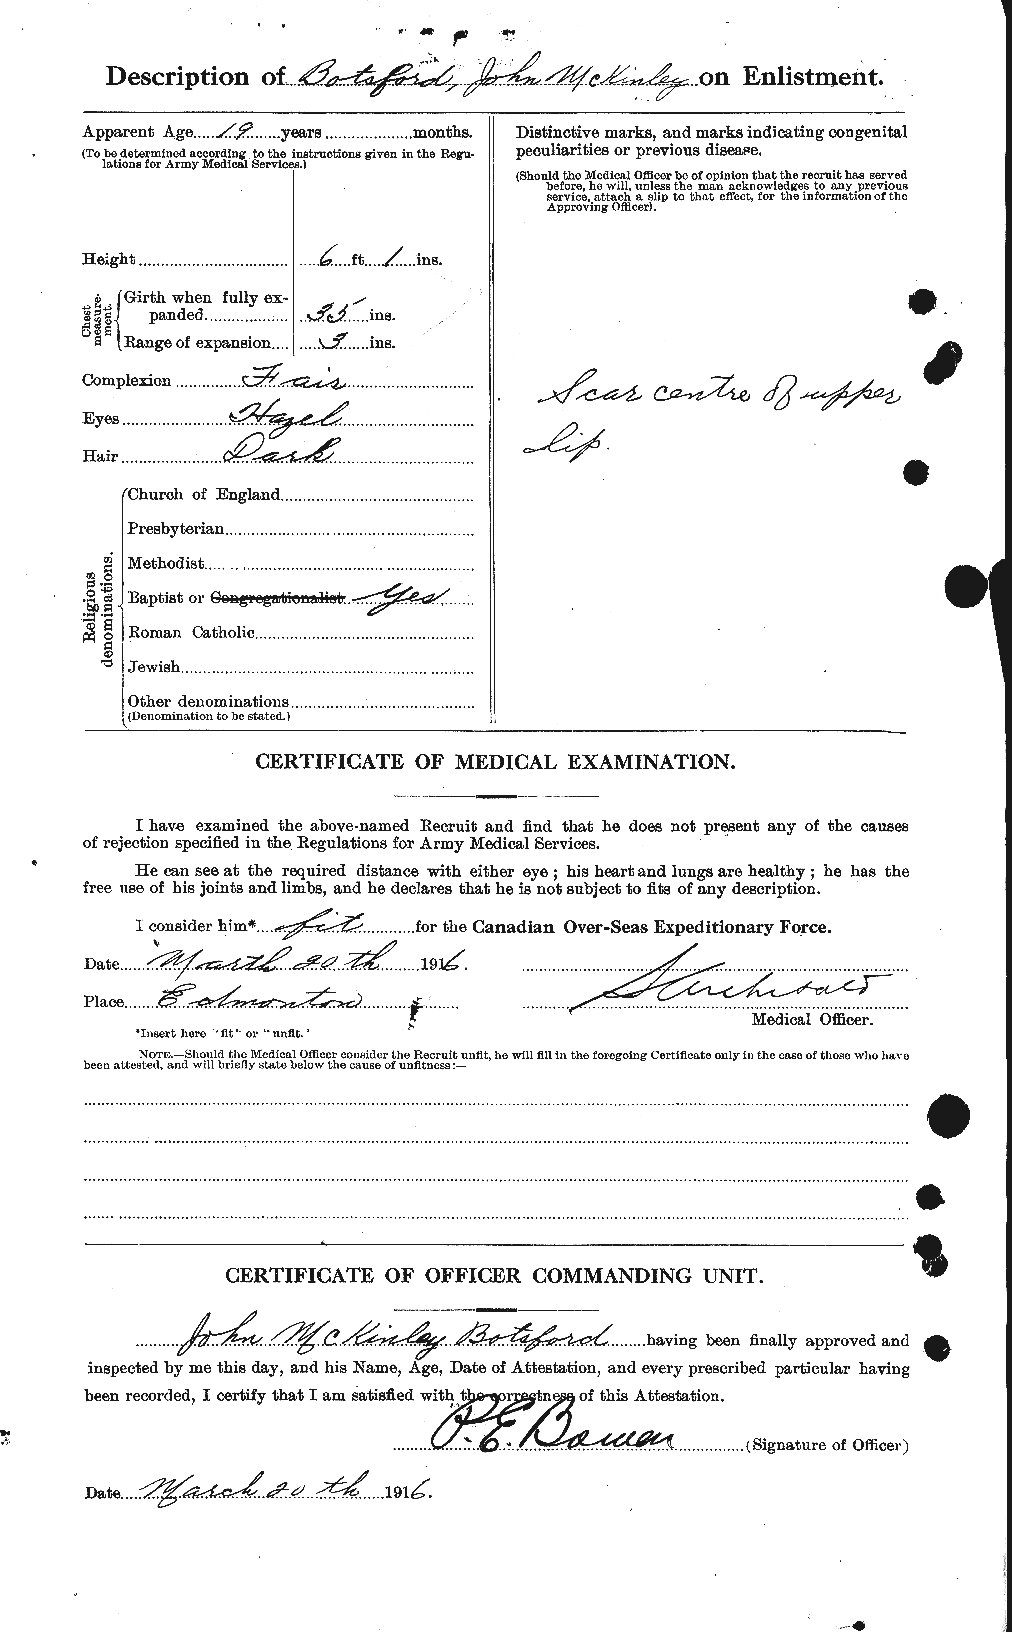 Personnel Records of the First World War - CEF 252036b